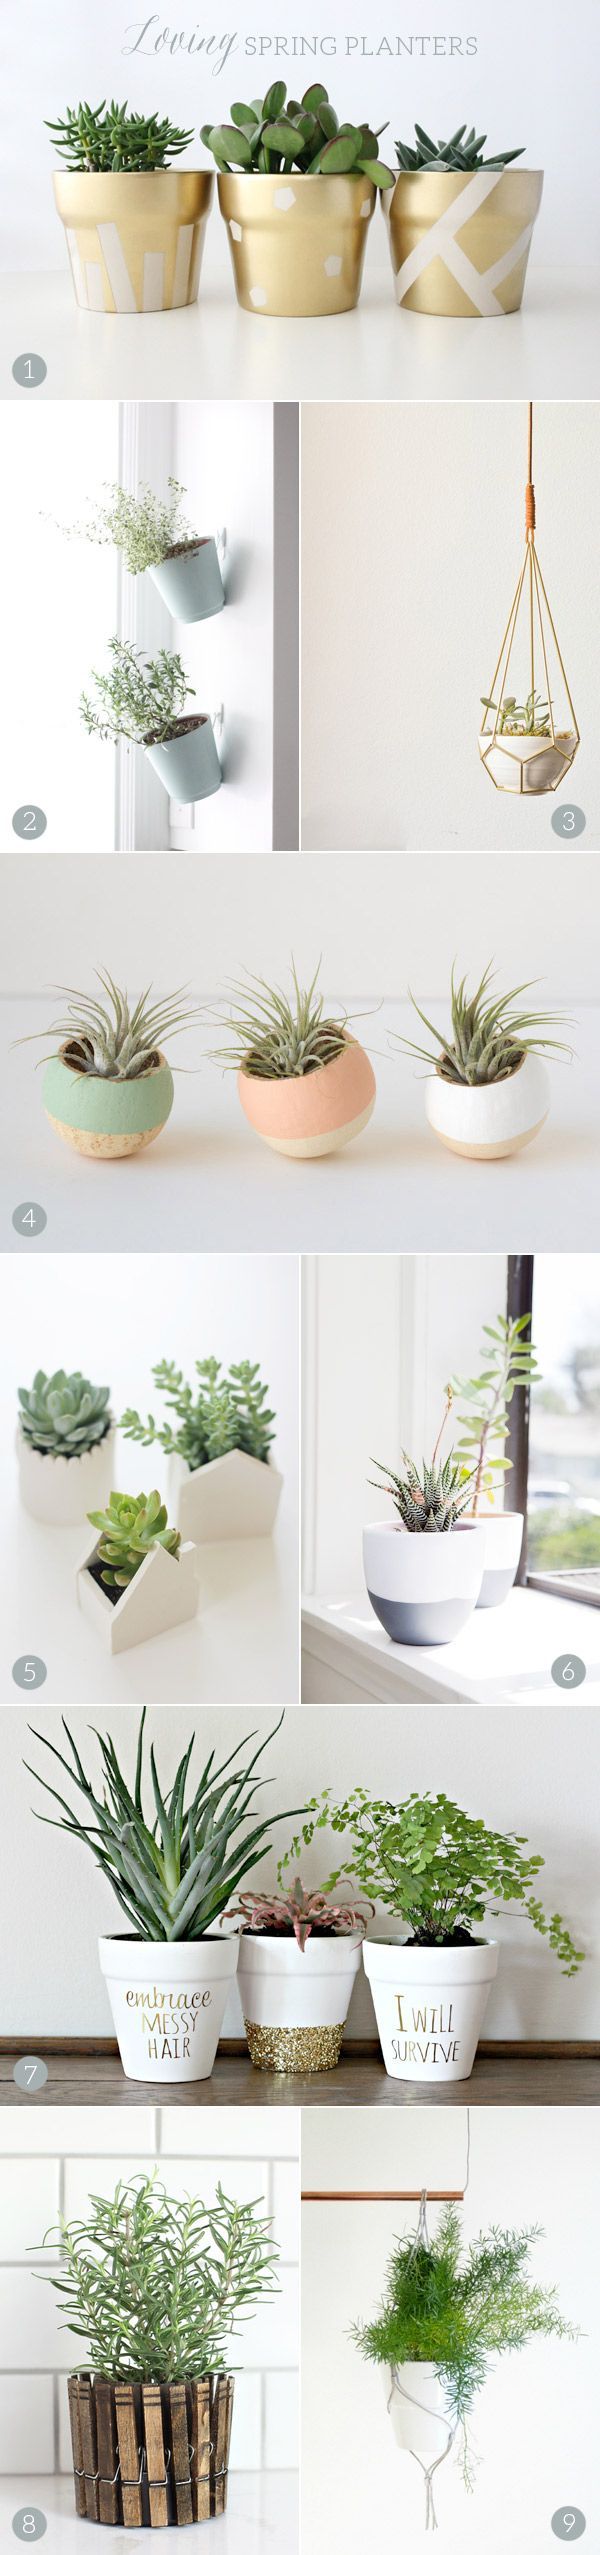 Beautiful DIY Planters | The Sweetest Occasion